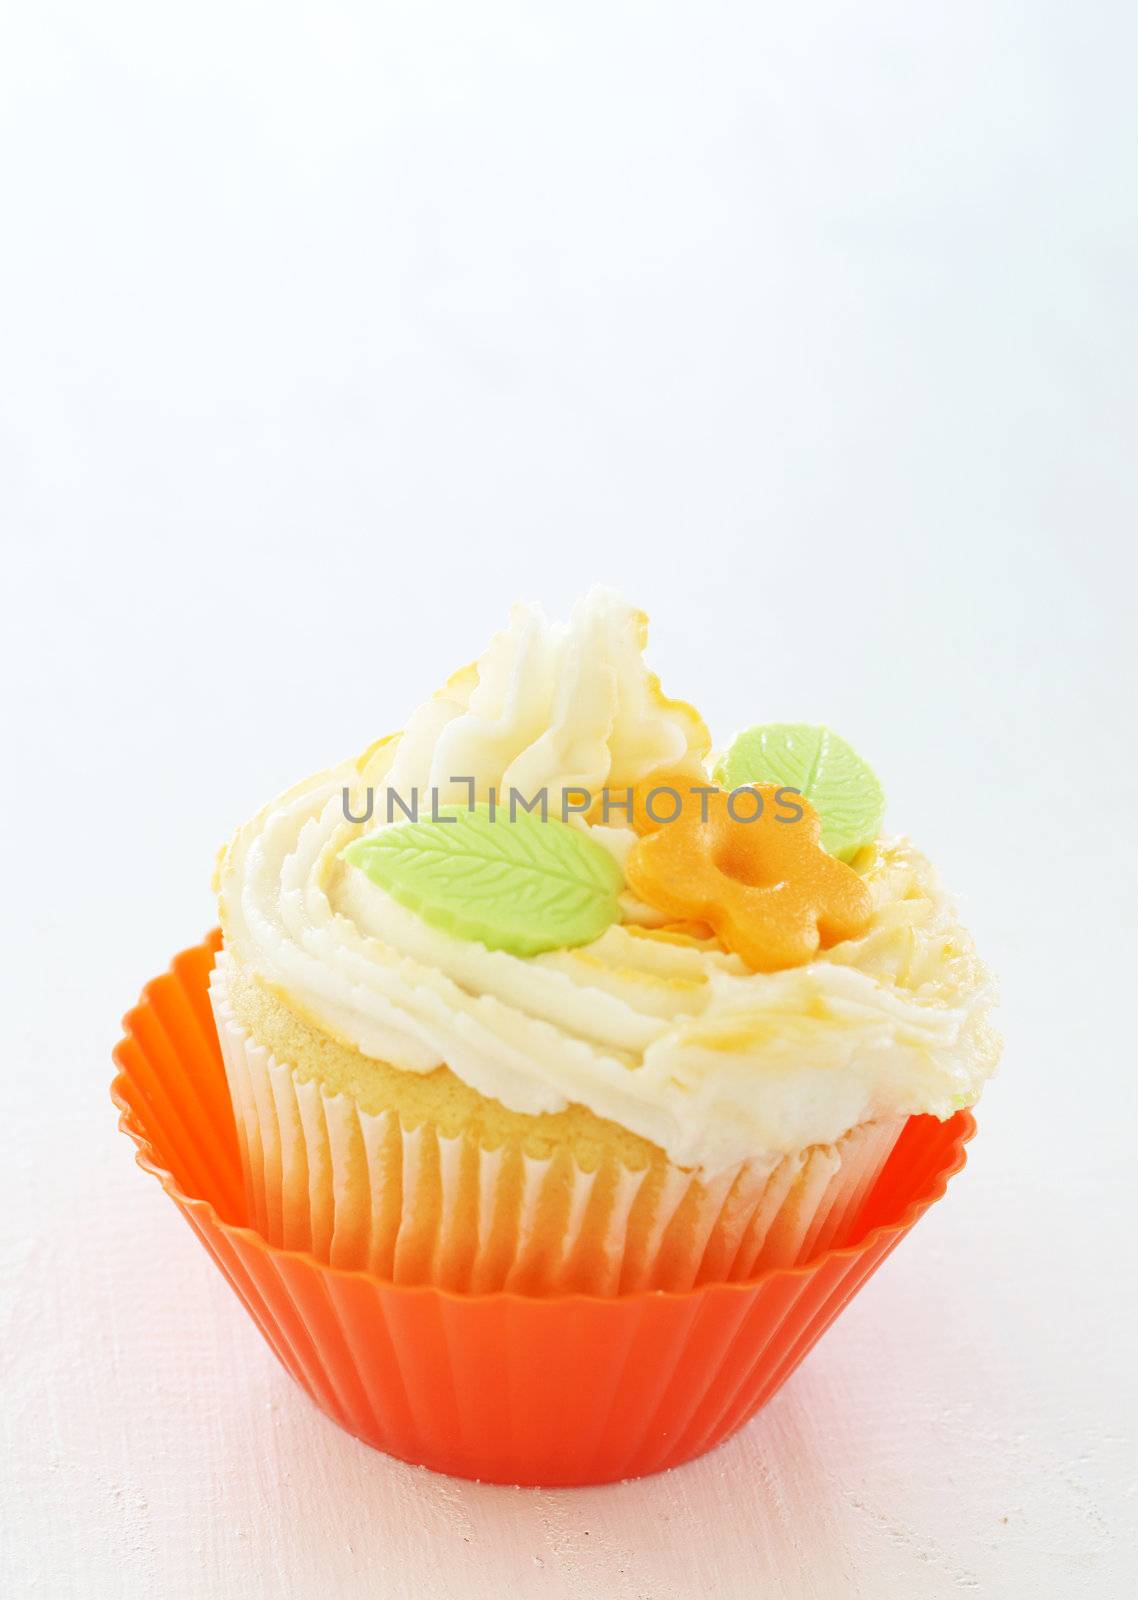 Vanilla cupcake with buttercream icing and flower decoration on white background